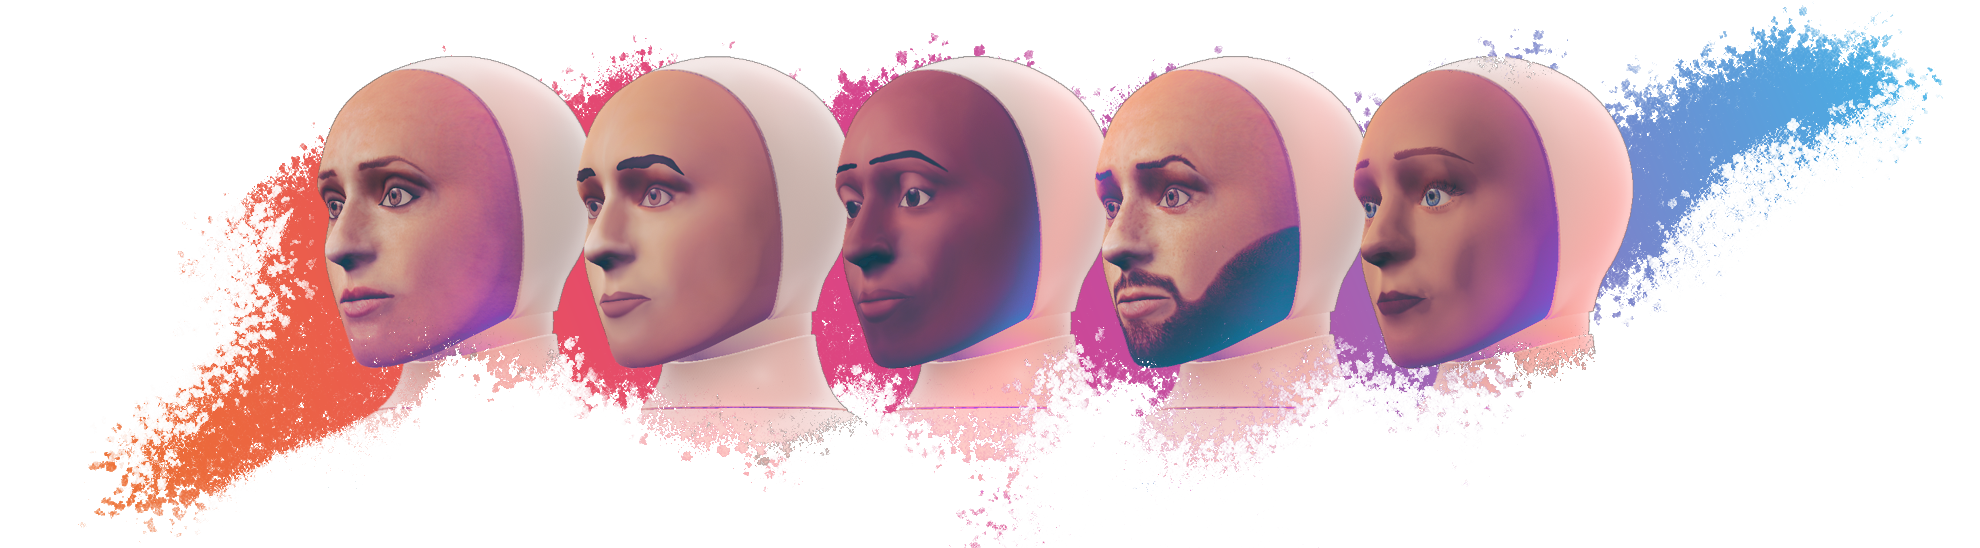 An artistically rendered image of a row of Furhat robot faces.